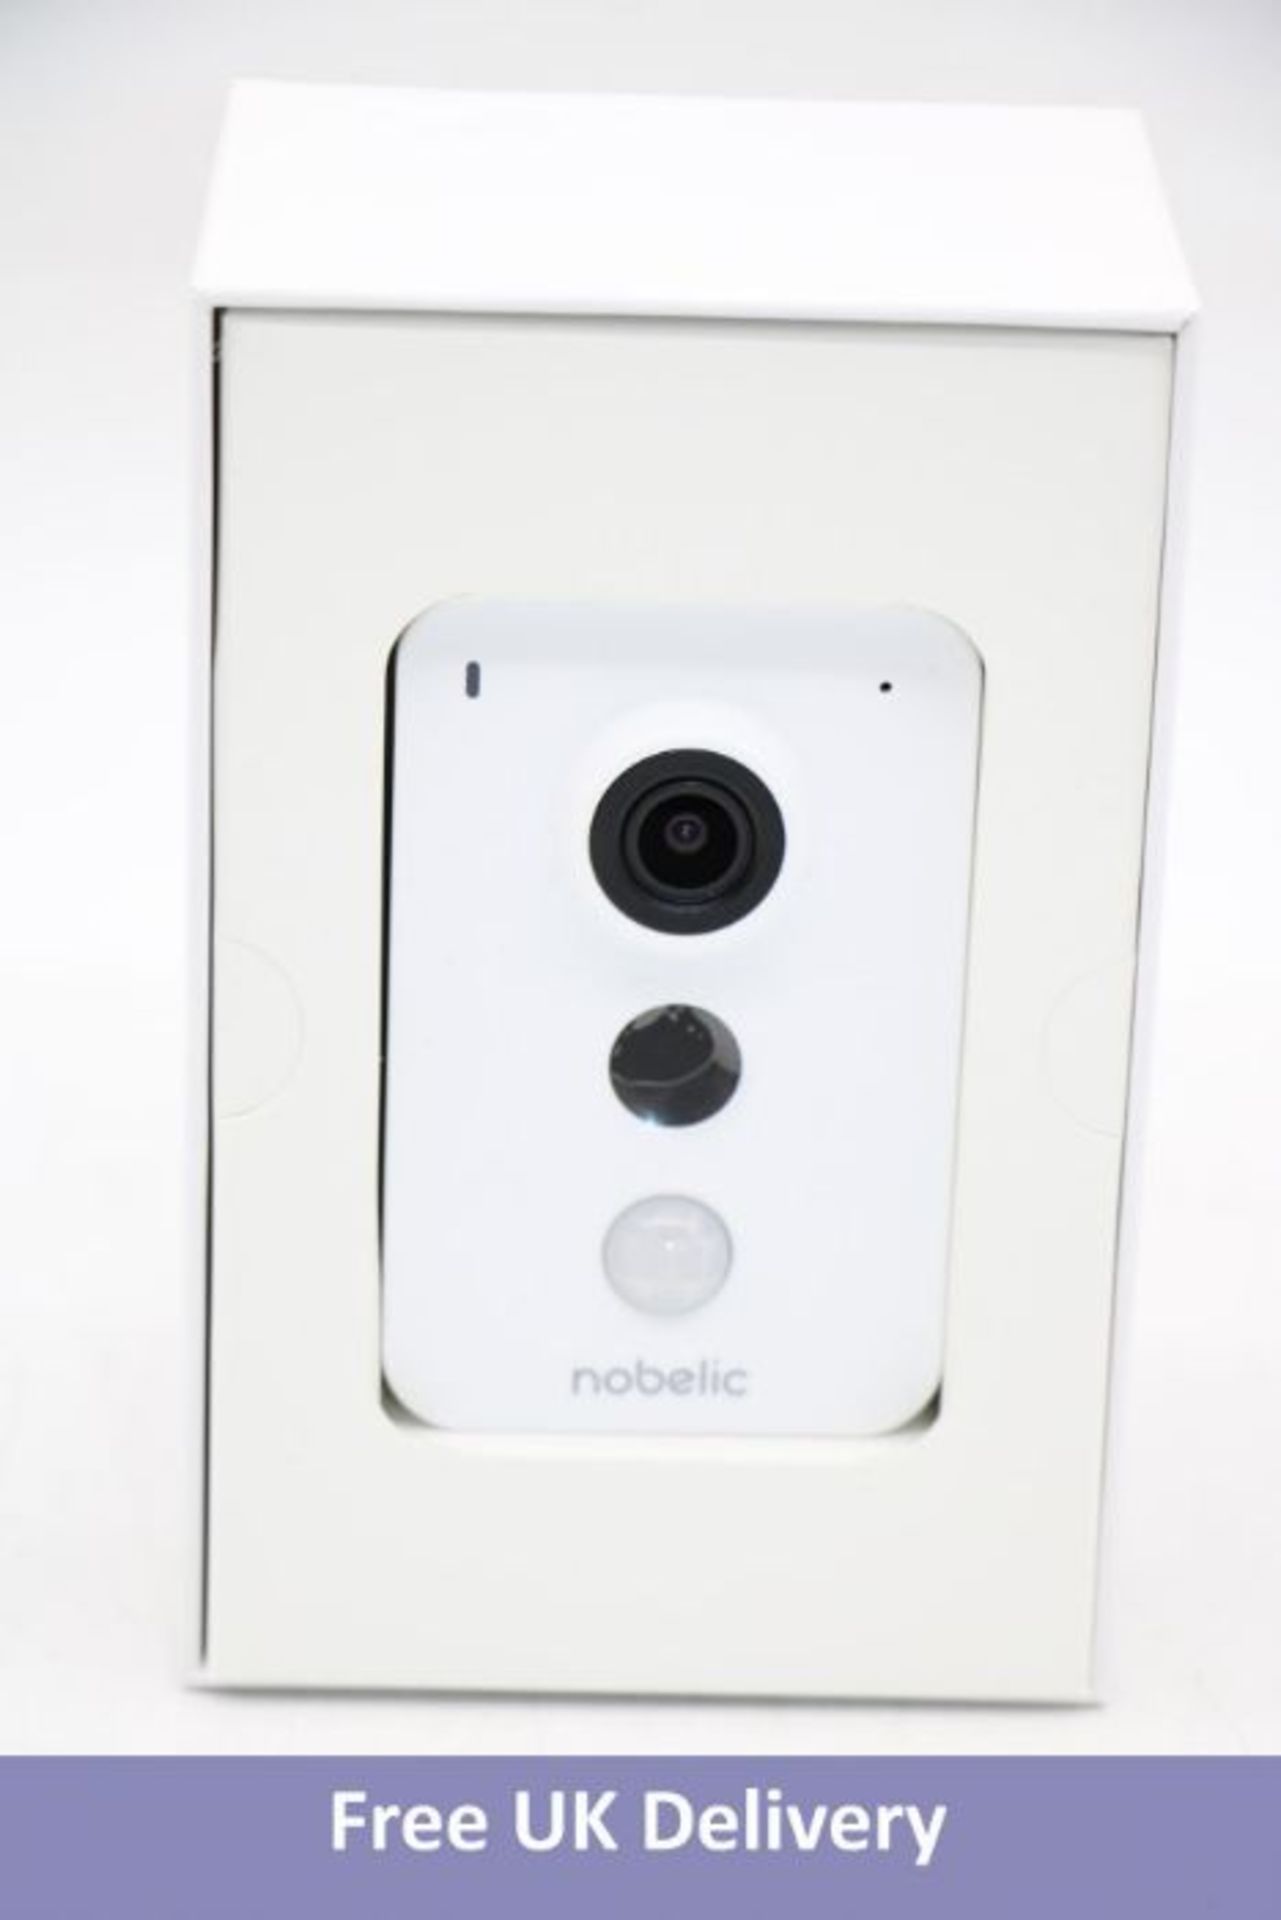 Seven Dahua 4 MP IP Camera Imou Cube DH-IPC-K42AP, Built-in Microphone and Speaker - Image 4 of 7